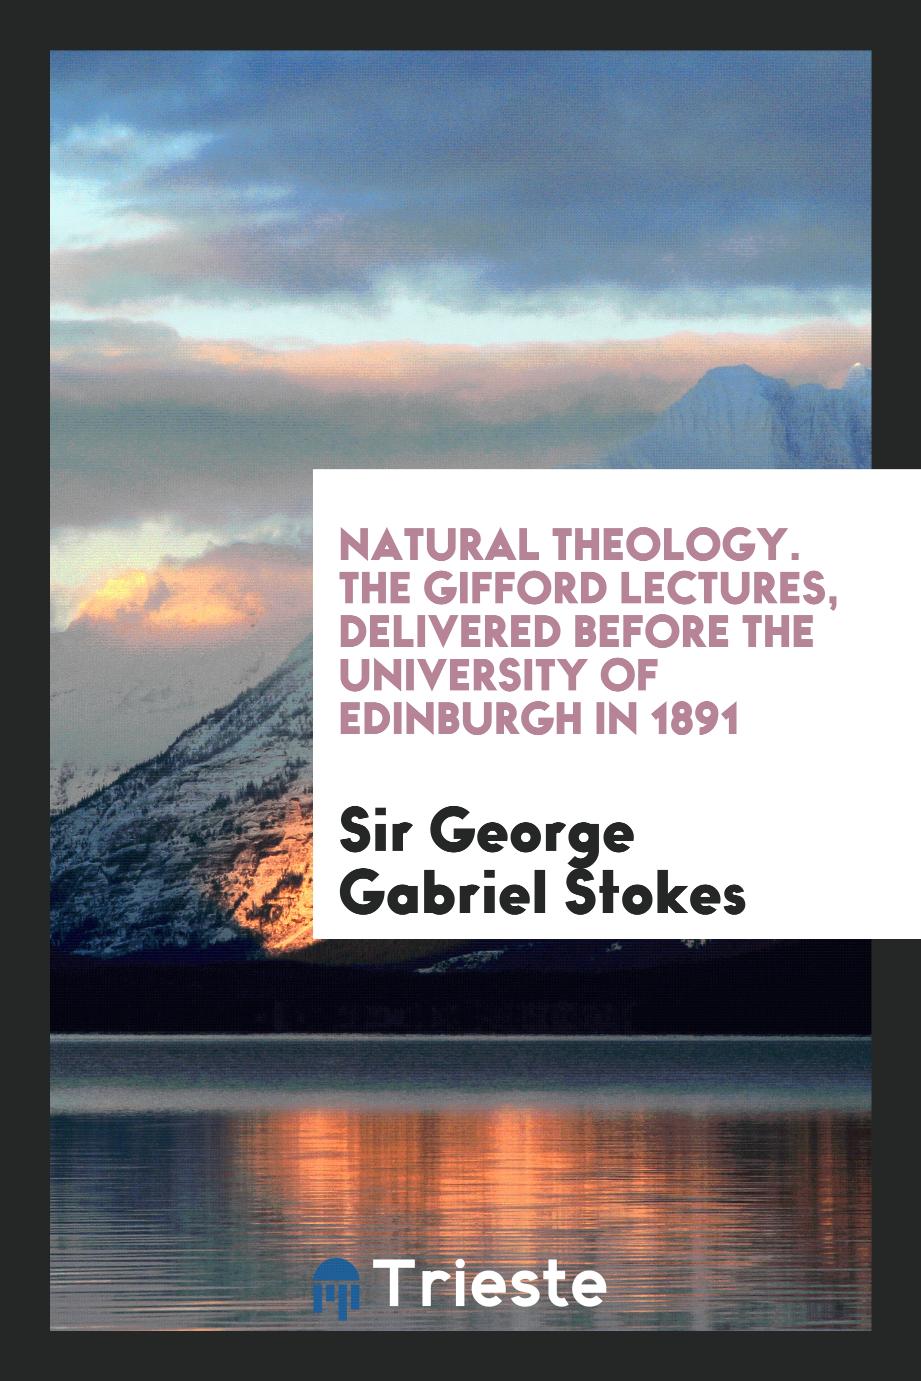 Sir George Gabriel Stokes - Natural theology. The Gifford lectures, delivered before the University of Edinburgh in 1891